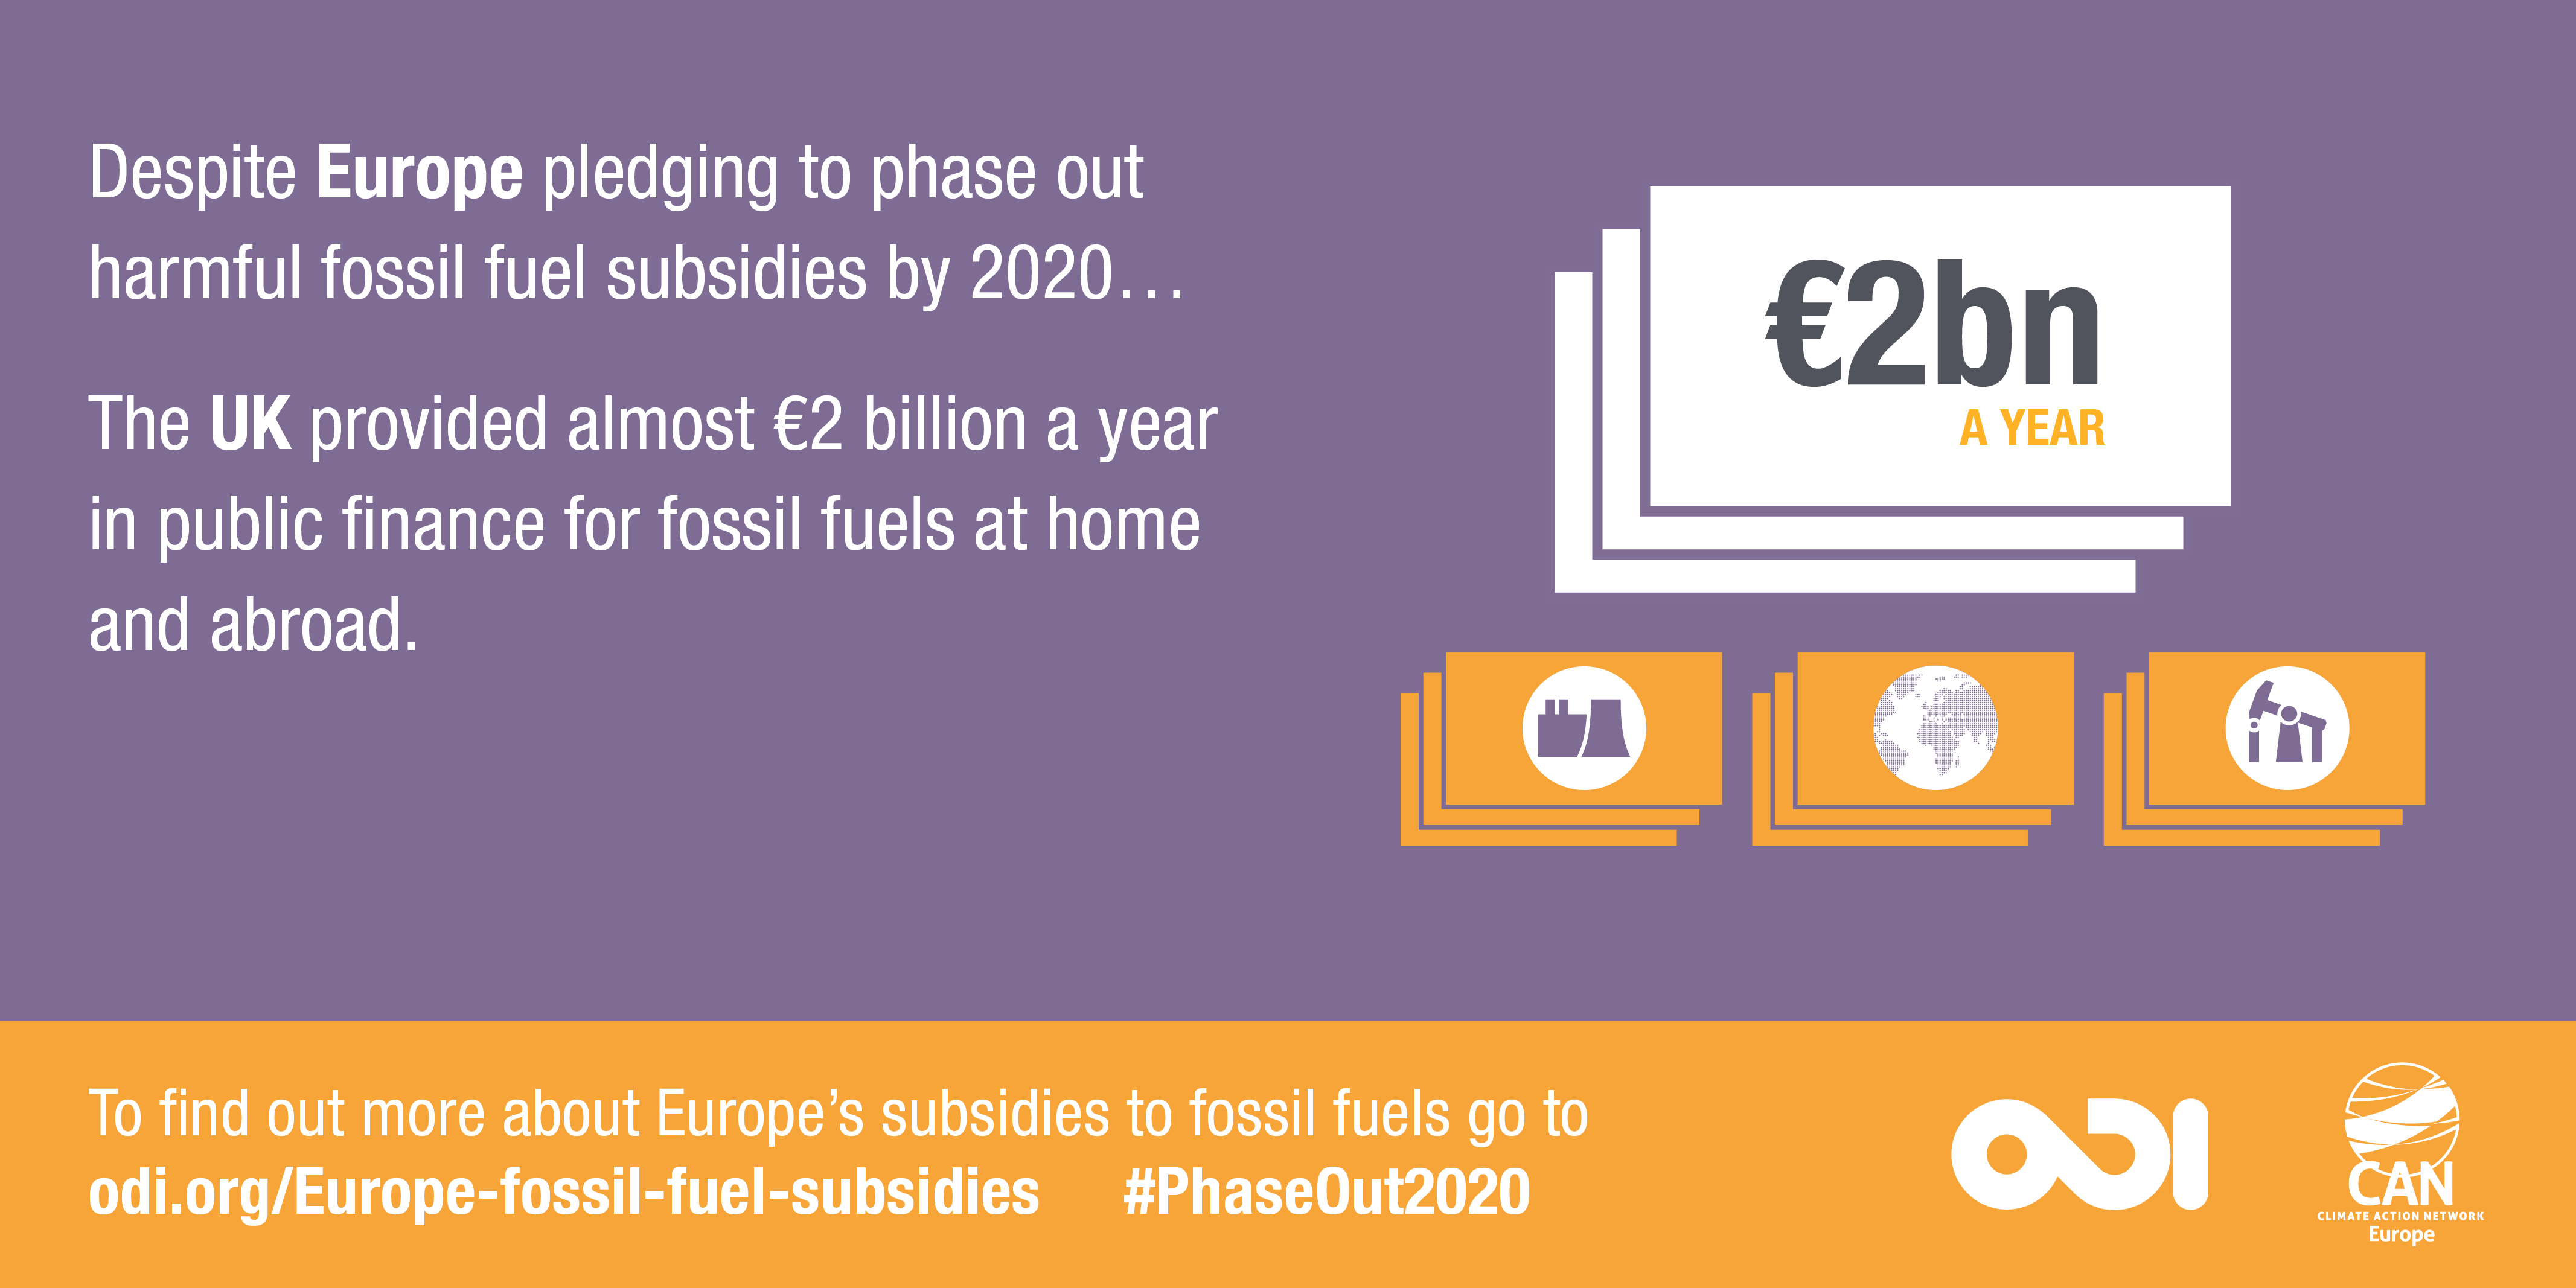 Infographic: The UK provided almost €2 billion a year in public finance for fossil fuels at home and abroad.